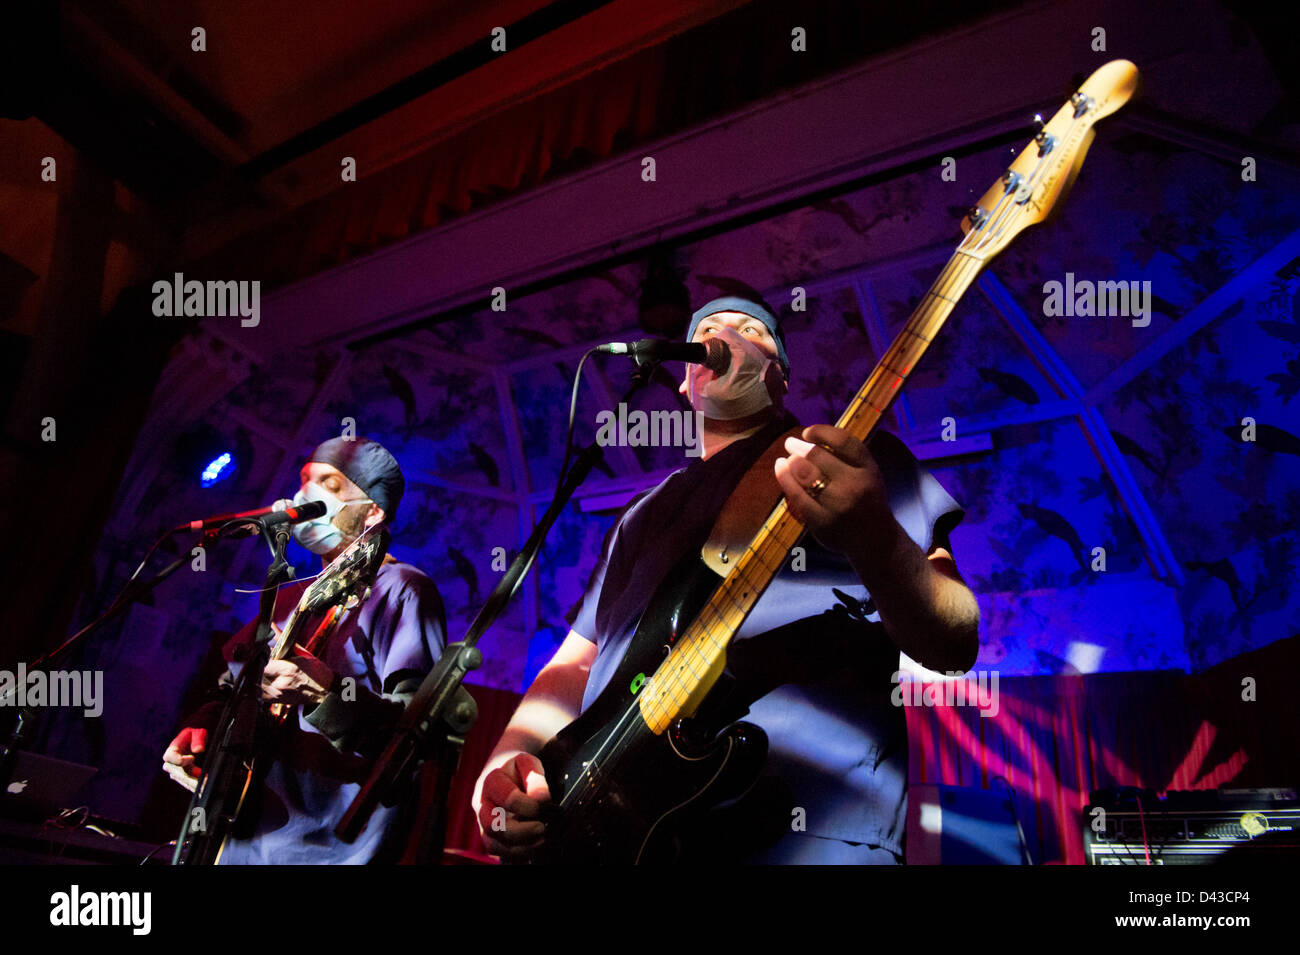 Alternative rock band Clinic in concert at the Deaf Institute, Manchester, on 2 March 2013. The band perform live with surgical masks and gowns. Guitarist Ade Blackburn left and bass player Brian Campbell on the right. Stock Photo